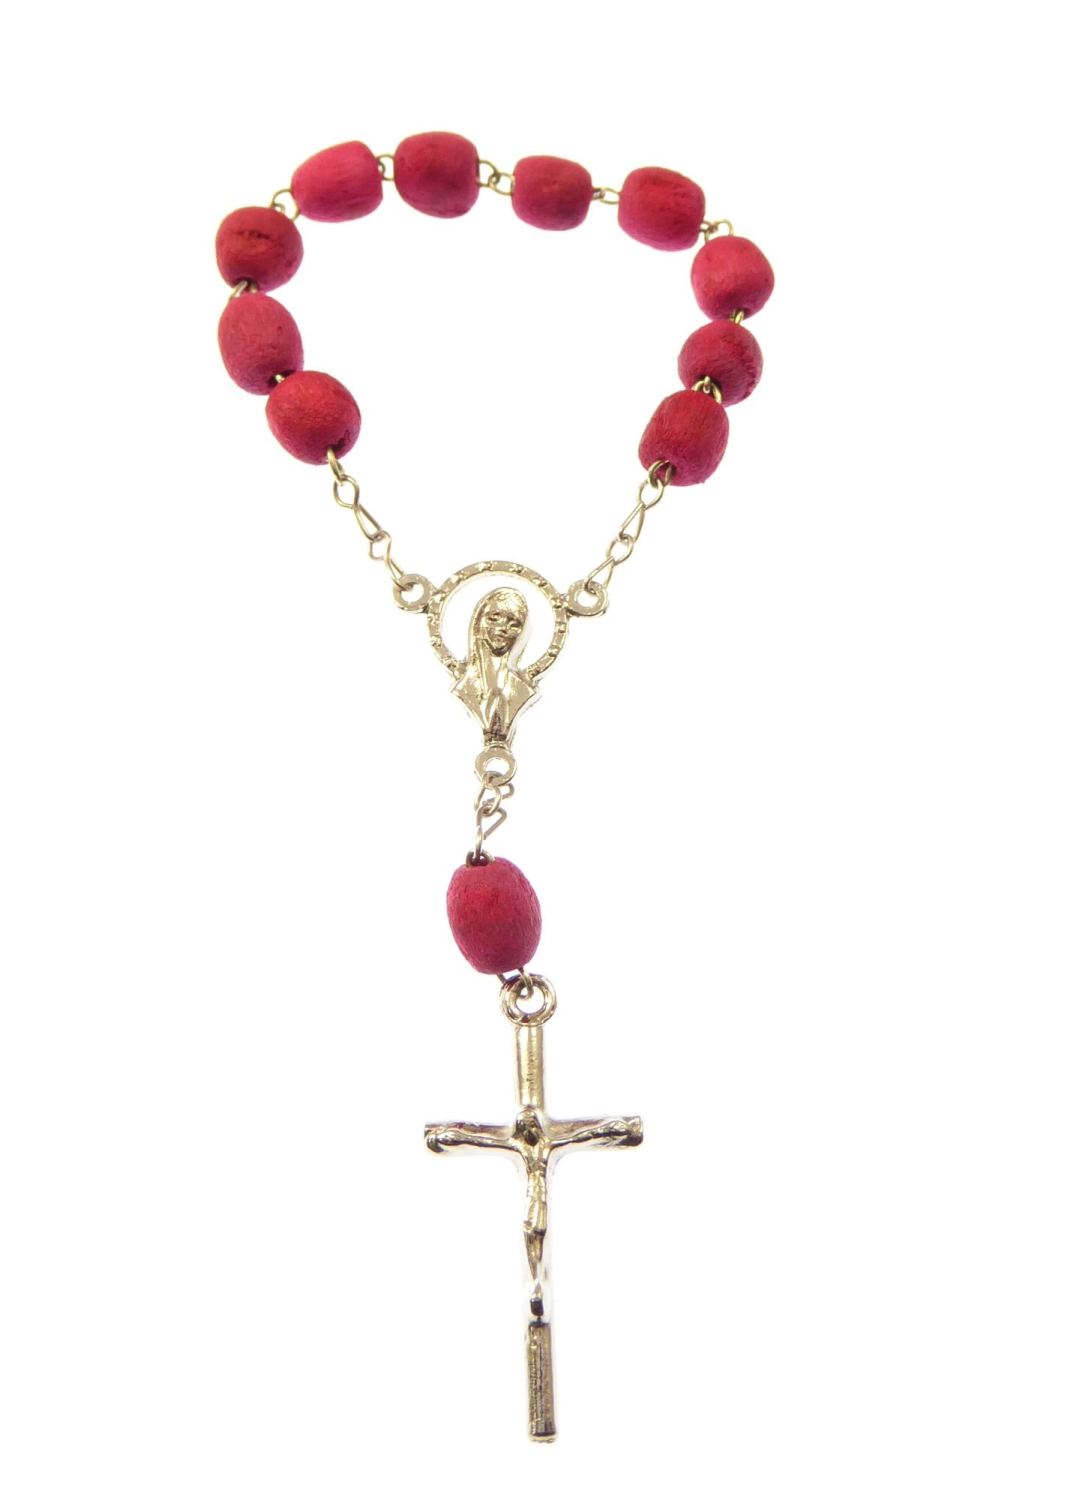 1-Decade rosary rose scented red wood beads